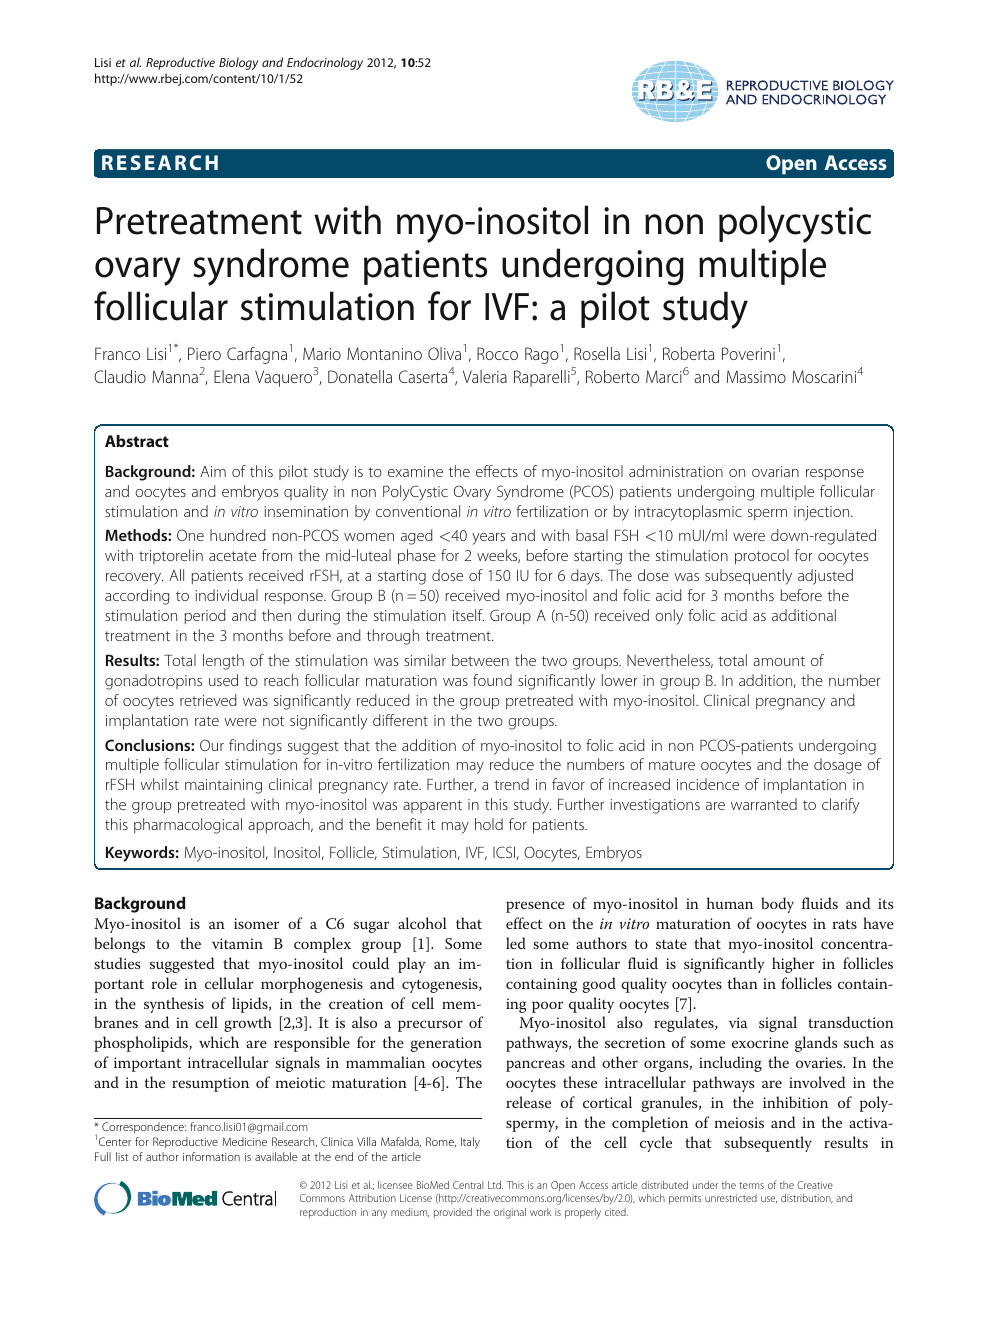 Pretreatment With Myo Inositol In Non Polycystic Ovary Syndrome Patients Undergoing Multiple Follicular Stimulation For Ivf A Pilot Study Topic Of Research Paper In Medical Engineering Download Scholarly Article Pdf And Read